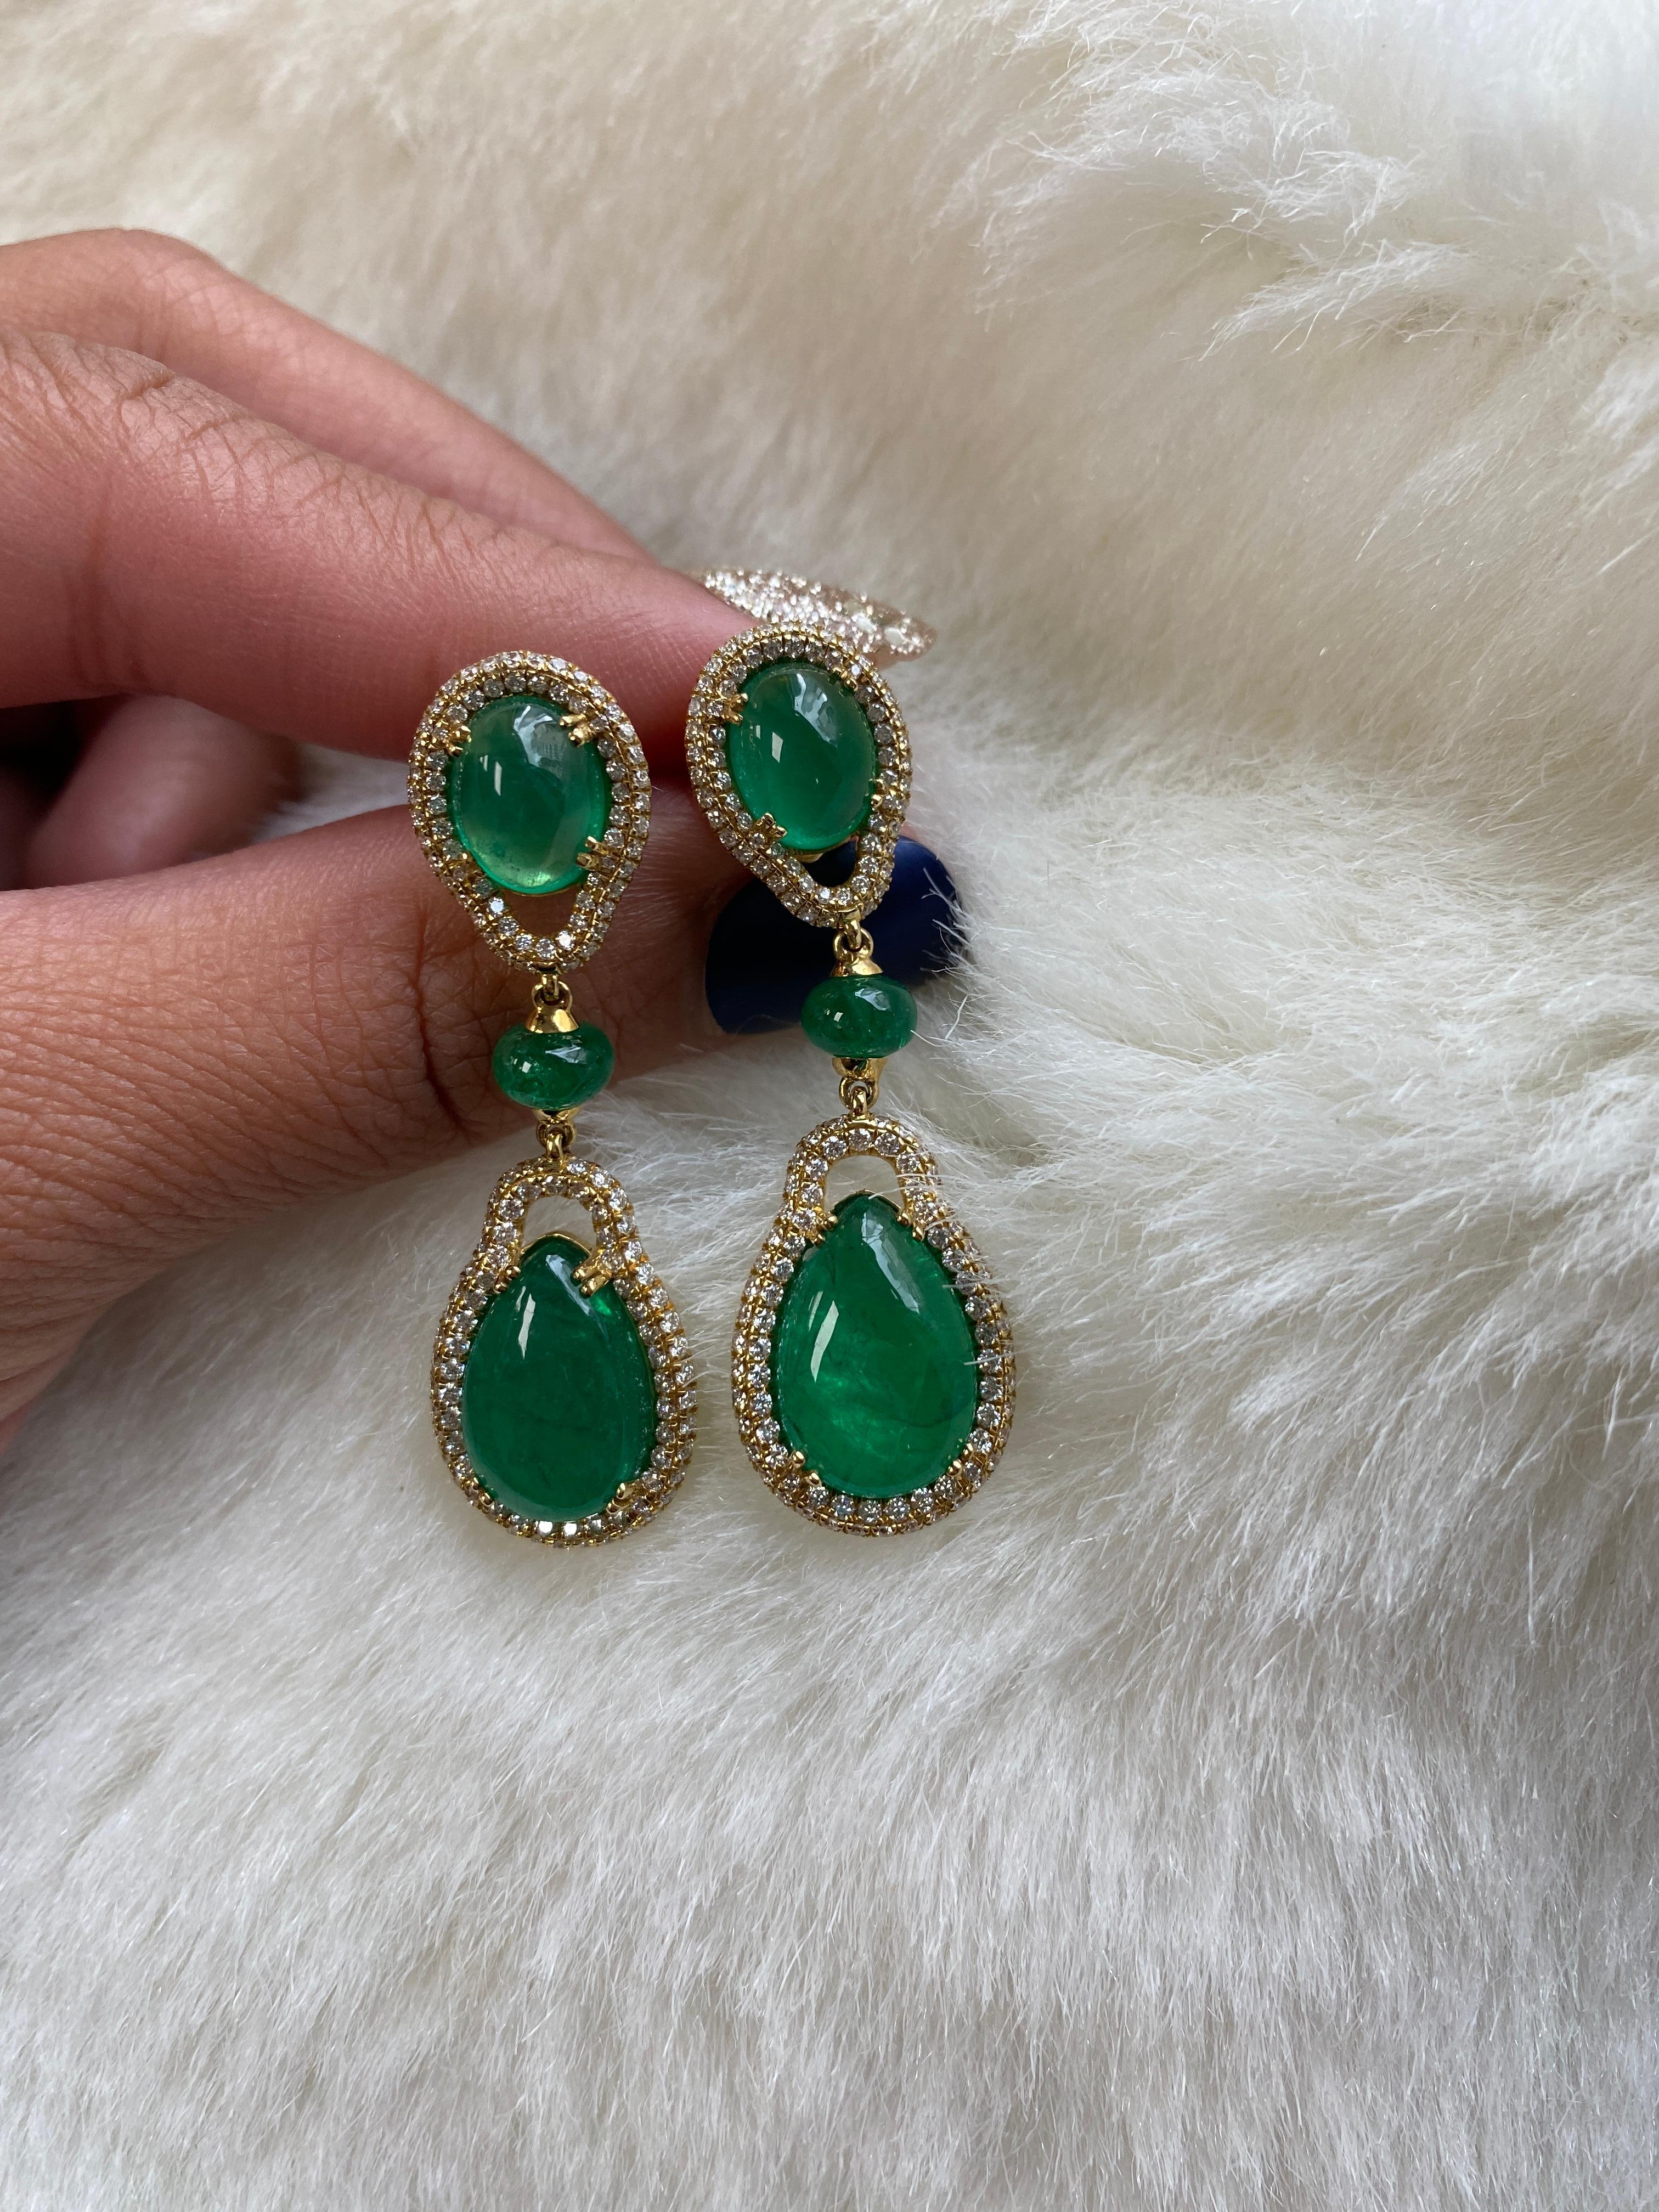 Contemporary Goshwara Pear Cabs and Emerald Round Beads With Diamond Earrings For Sale